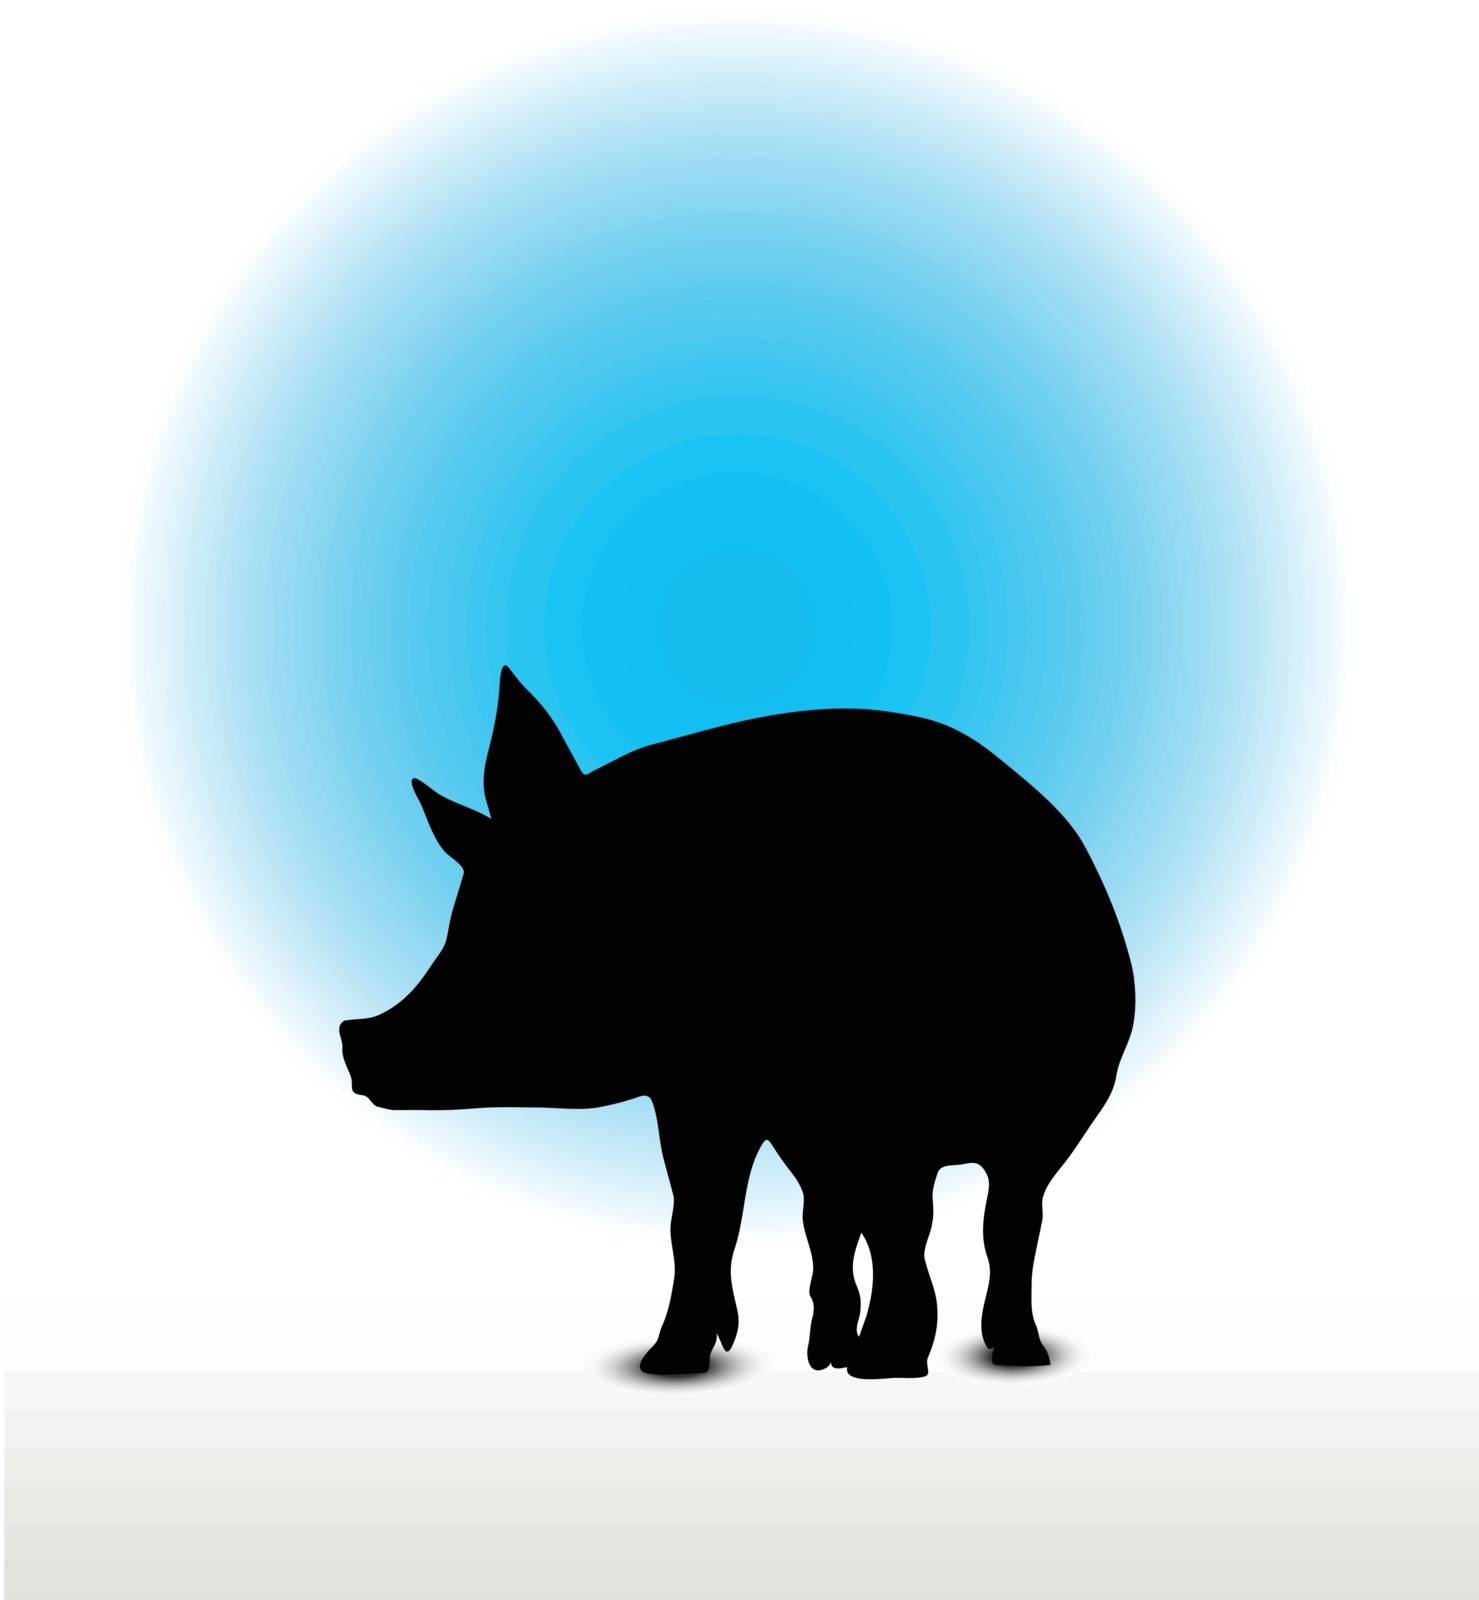 pig silhouette by Istanbul2009